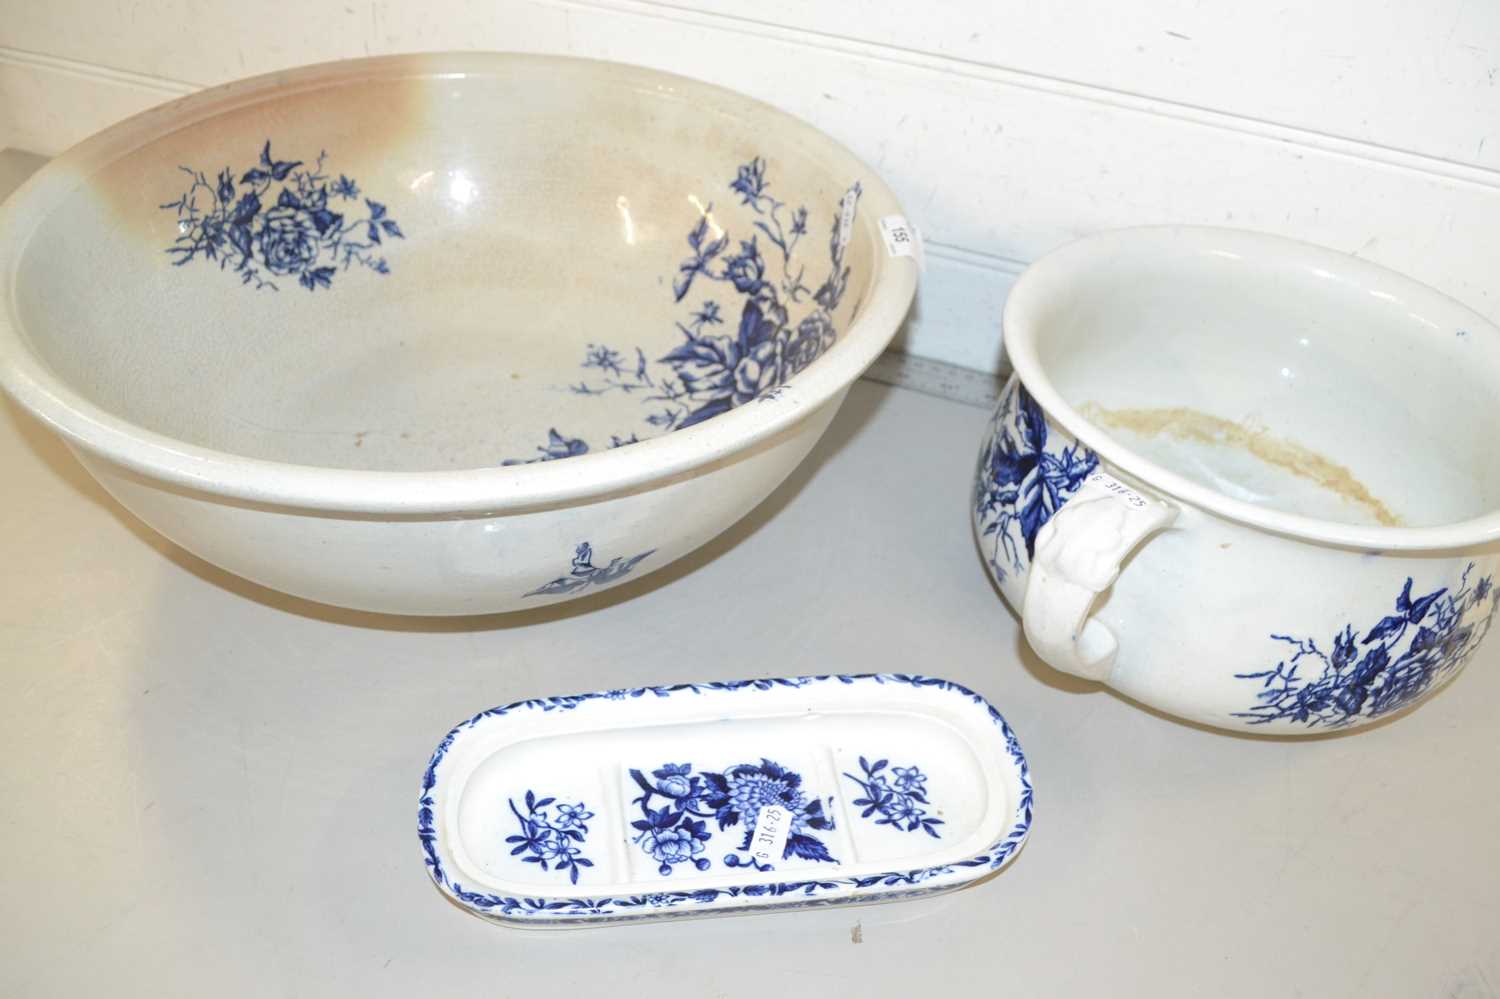 Blue and white wash bowl, chamber pot and soap dish